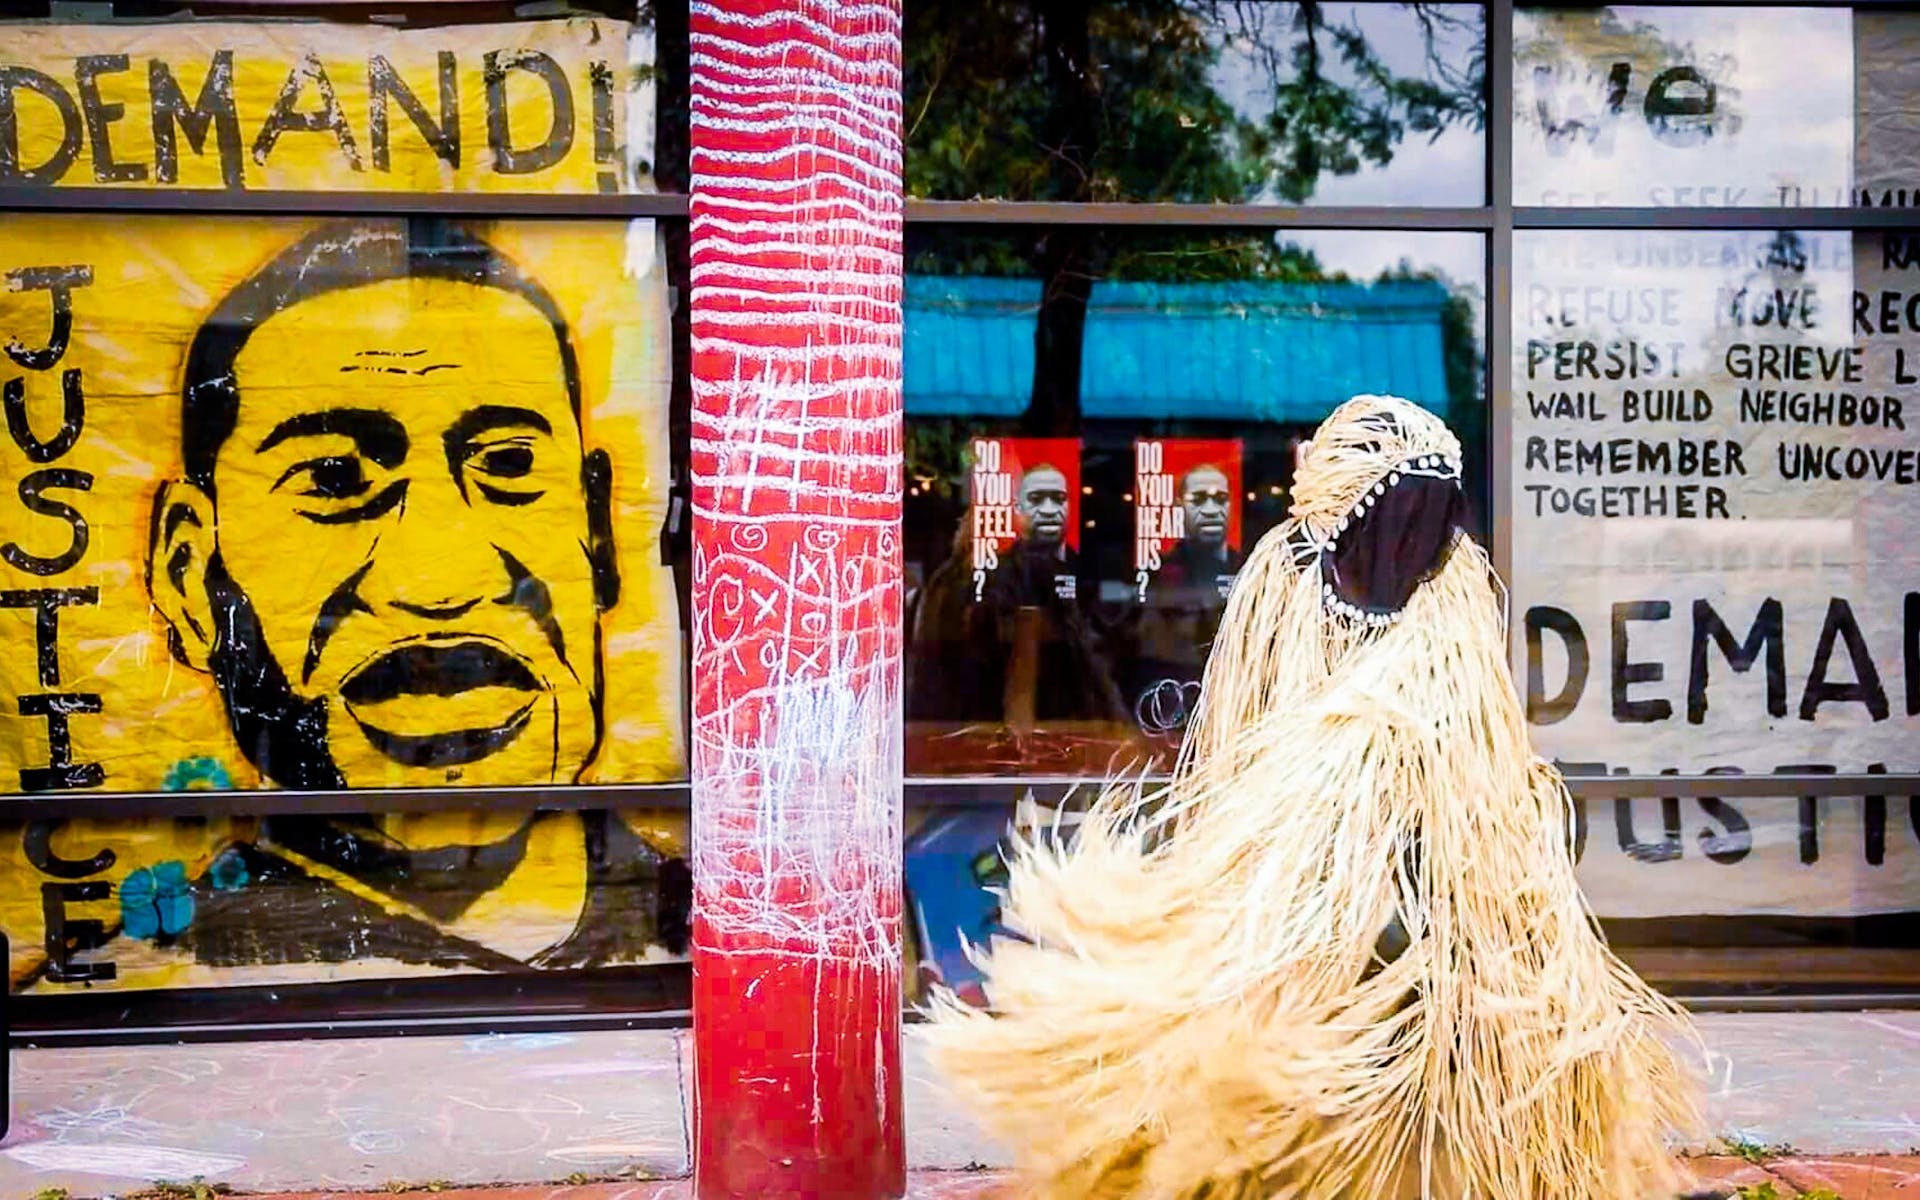 A person in a costume made of strips of straw stands outside next to a mural that reads "demand justice" and has a picture of George Flyod